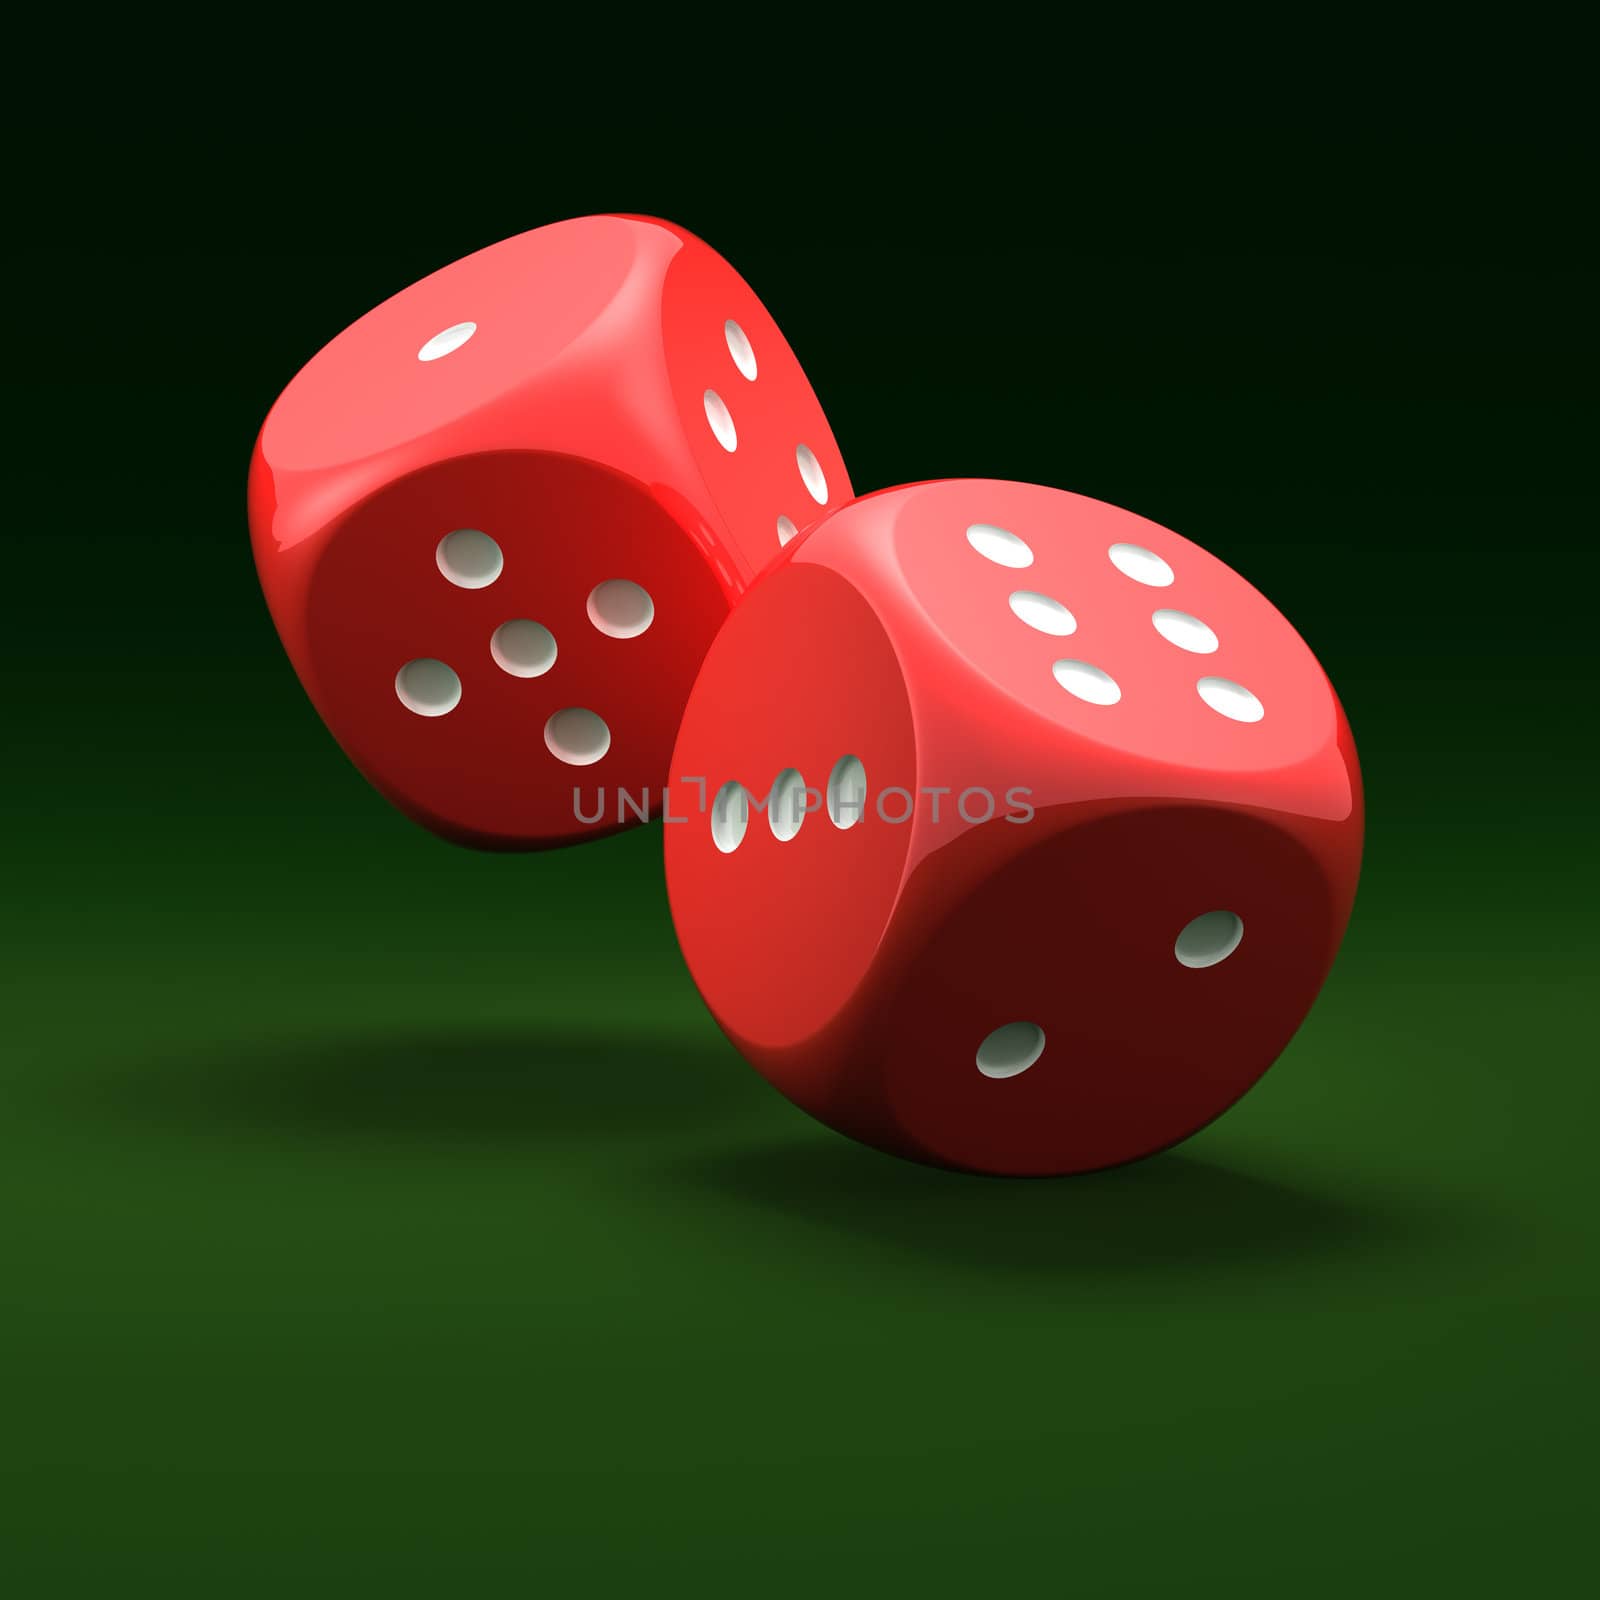 Red dice on green background